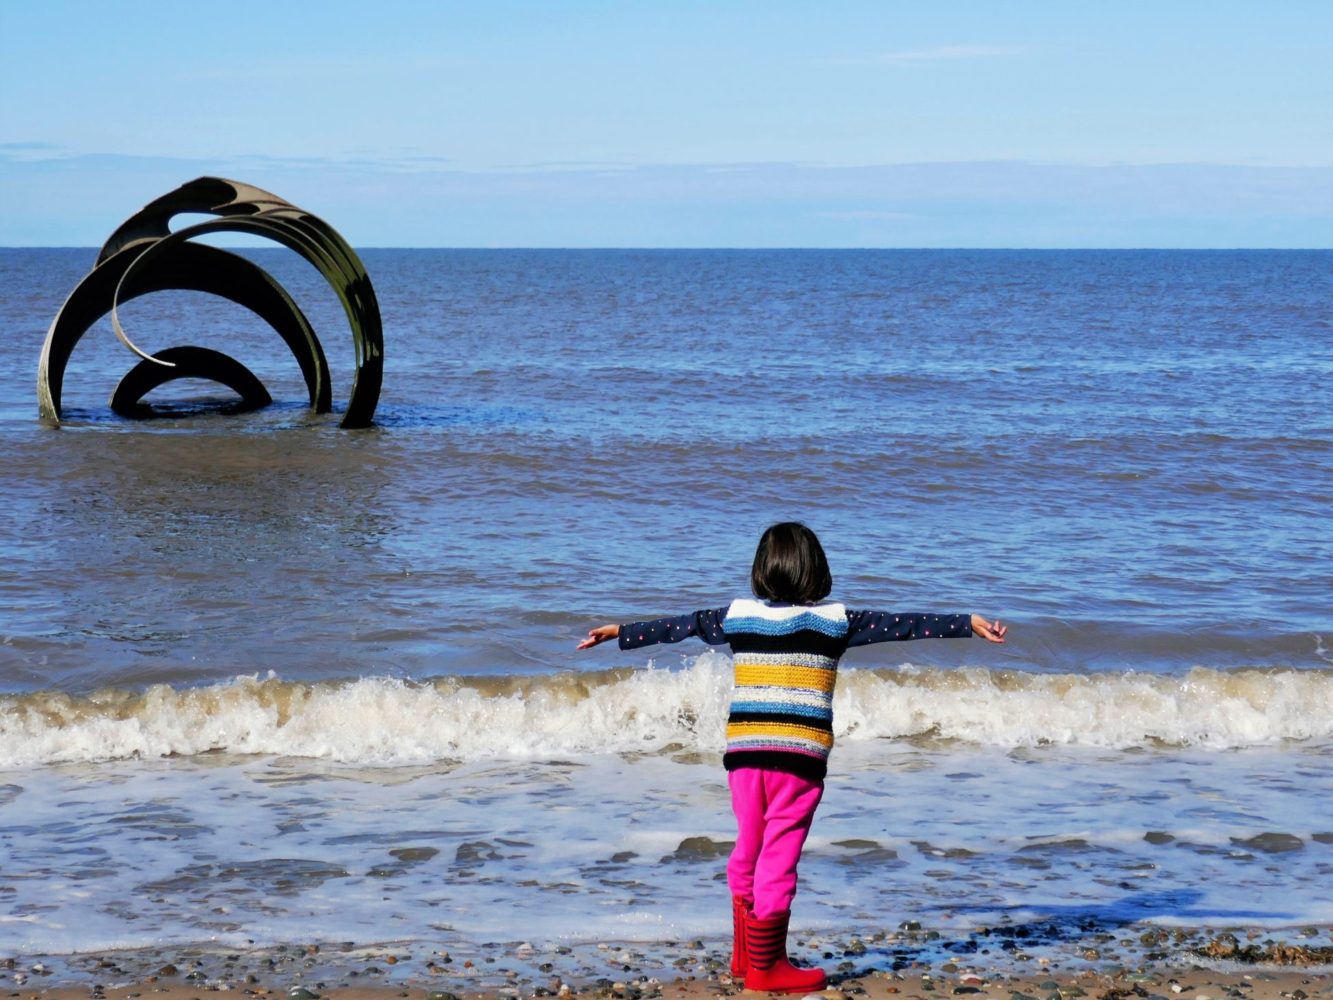 Marys Shell at Cleveleys - One of the family-friendly art walks in the North West